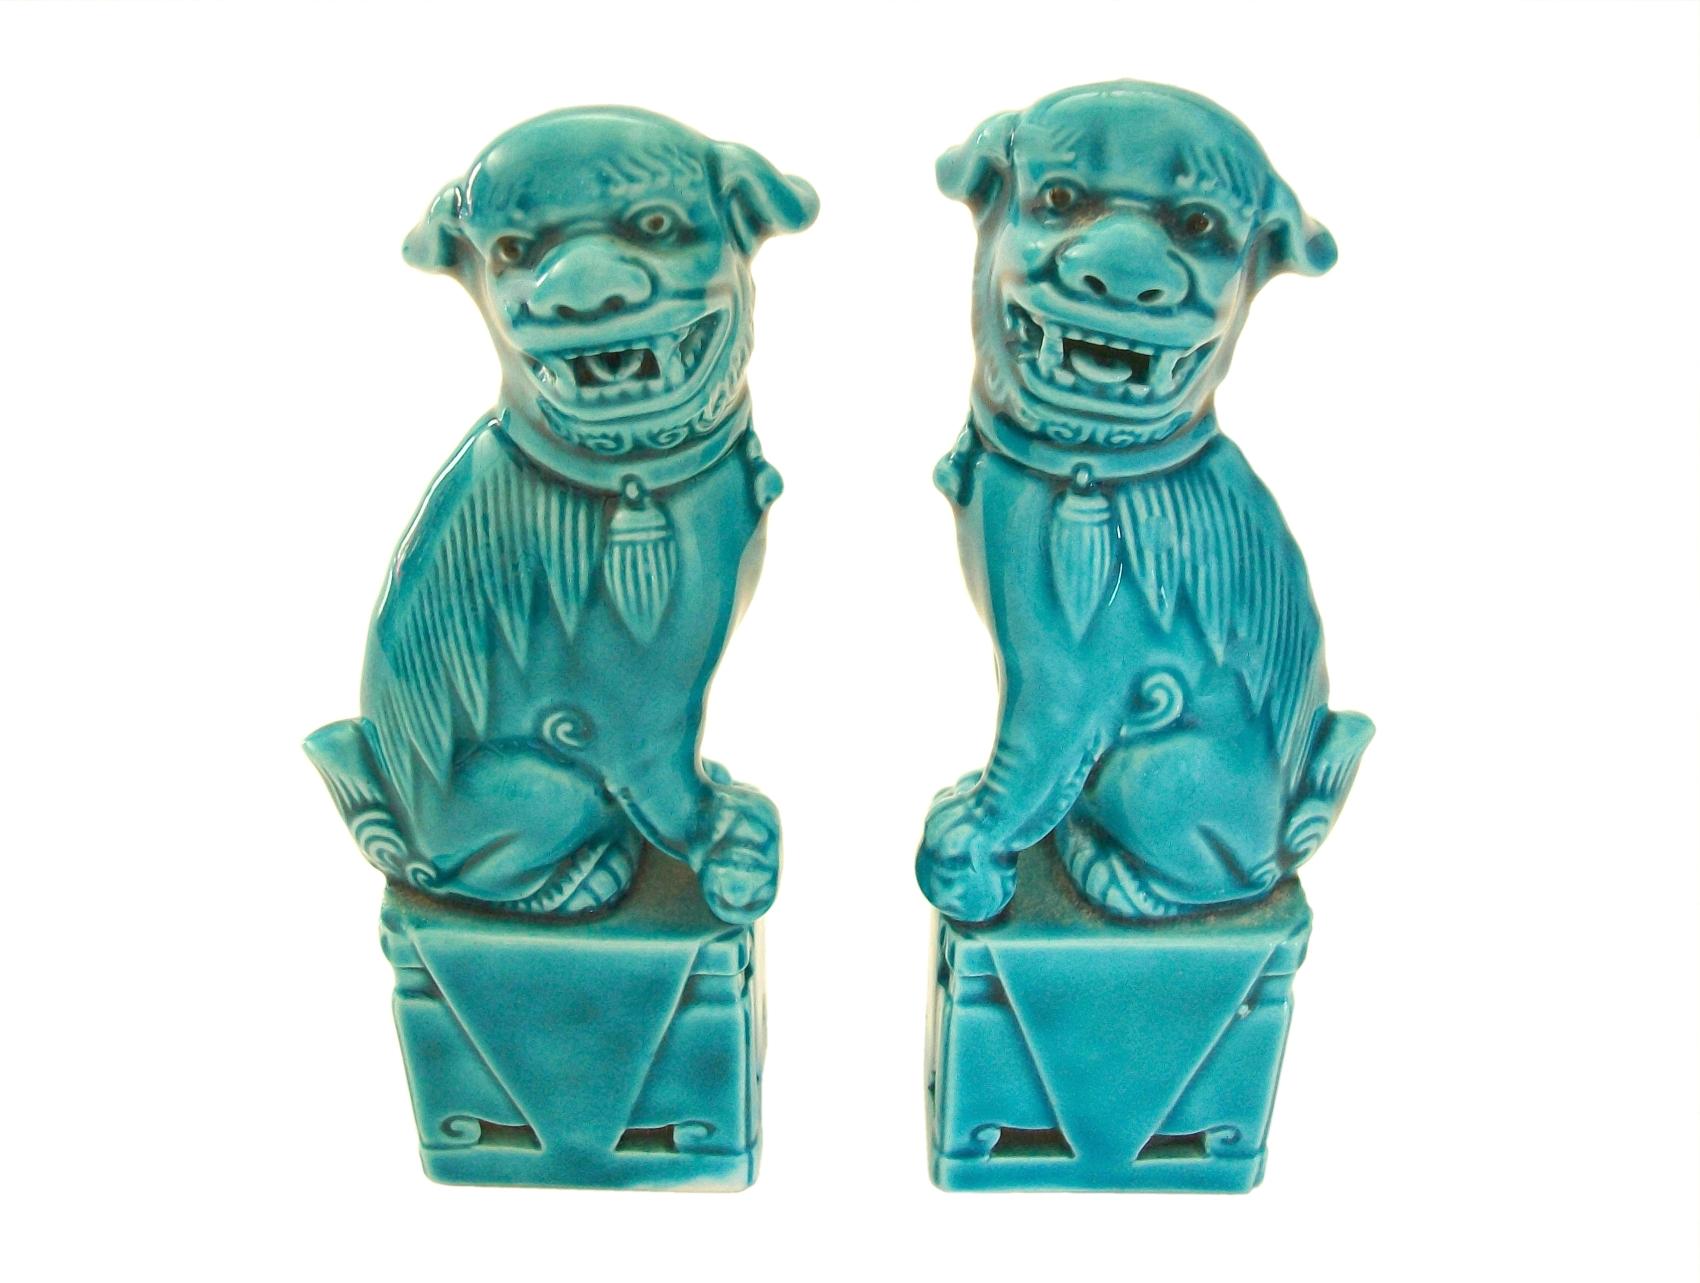 Miniature pair of vintage turquoise glazed ceramic Foo Dogs - molded forms - hand painted glossy glaze - unsigned - China - circa 1980's.

Excellent vintage condition - minor glaze flake / chip to one ear (appears like thin areas of glaze - see